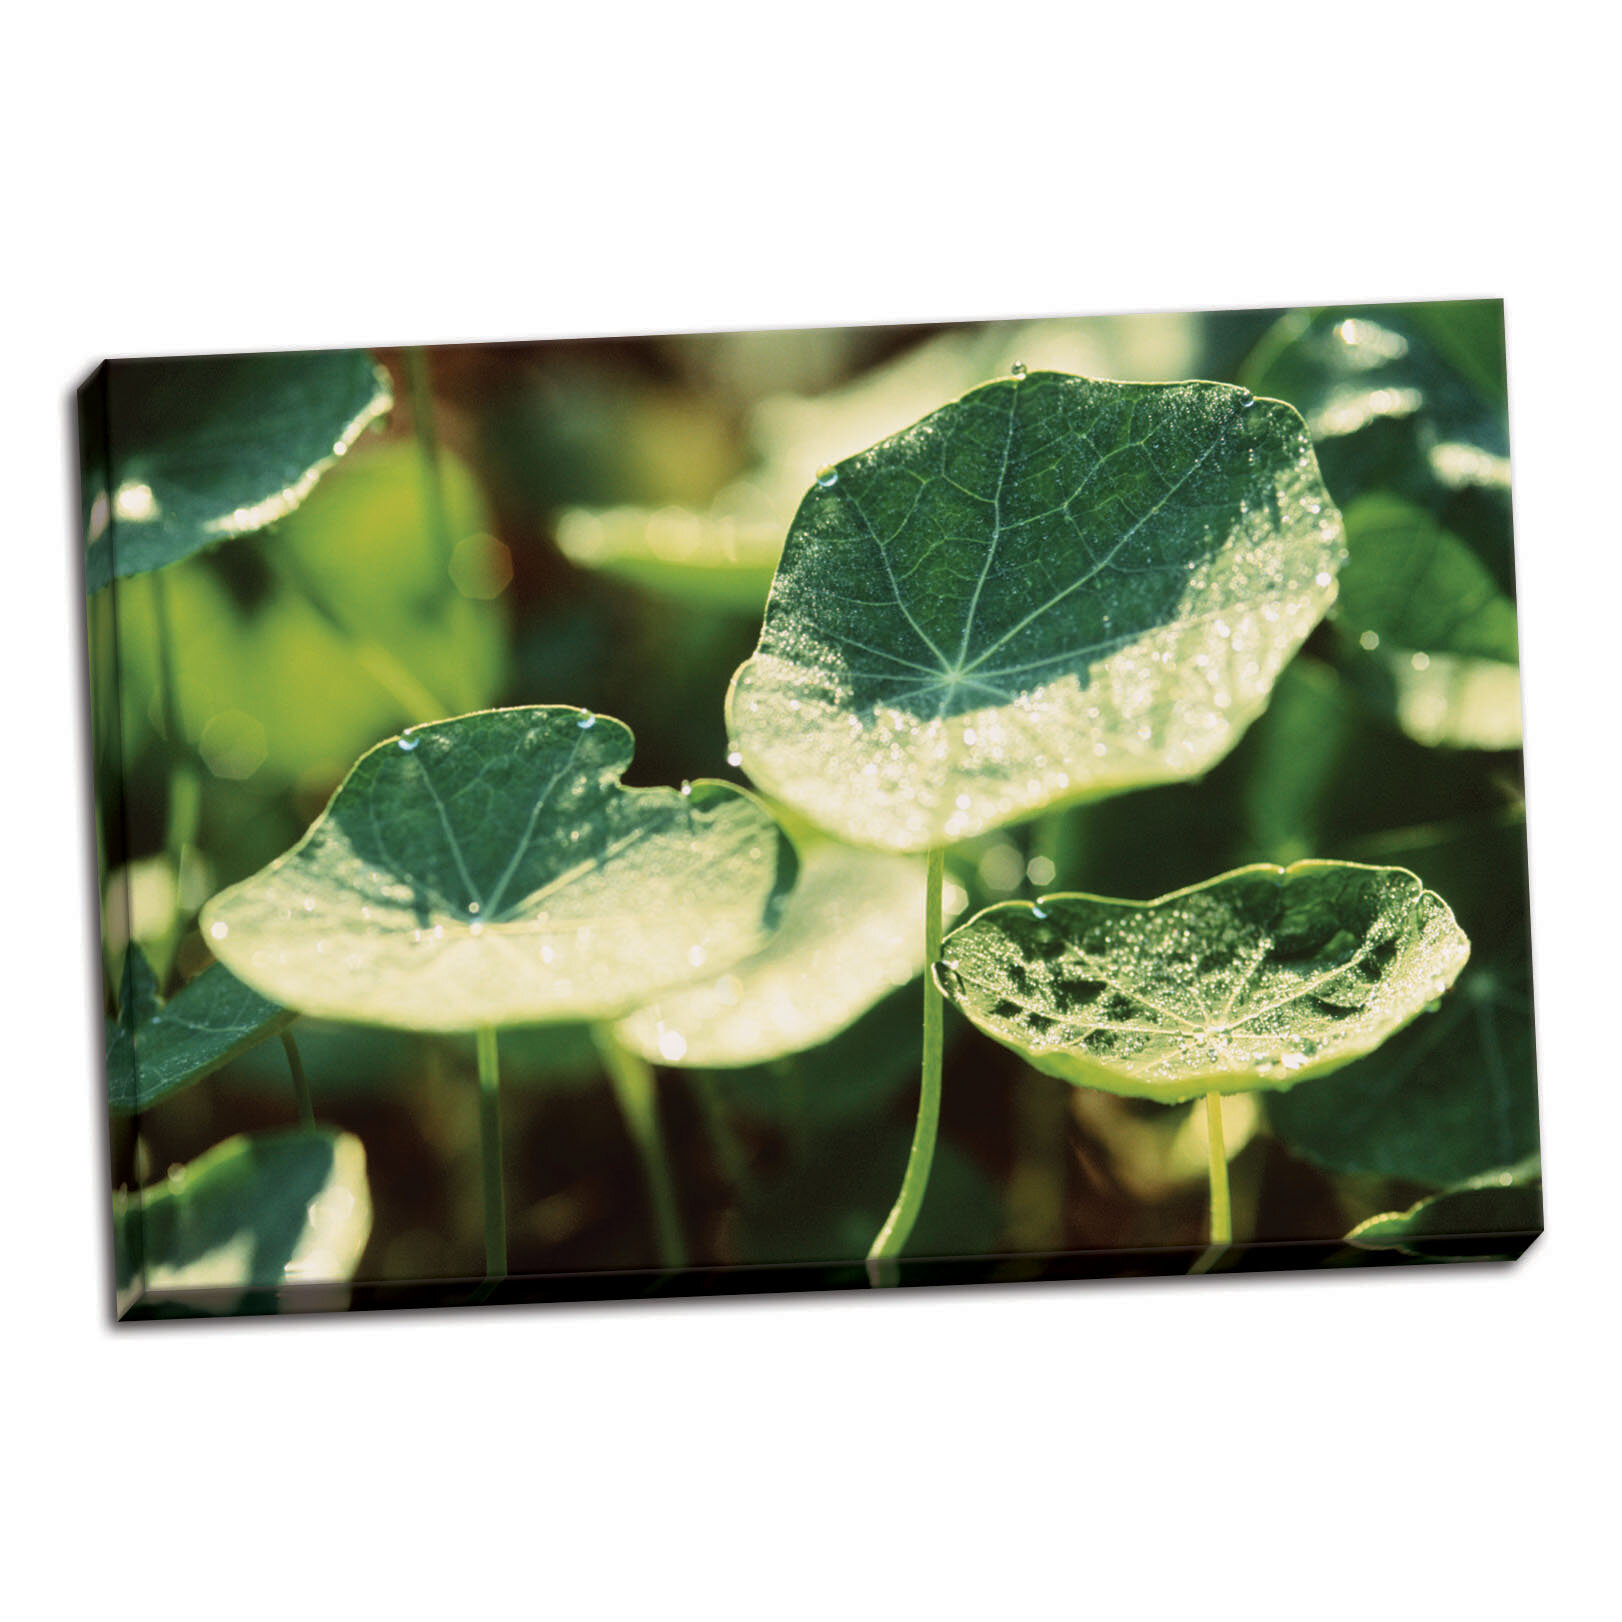 Bay Isle Home Nasturtium Leaves Photographic Print On Wrapped Canvas Wayfair,Granny Square Patterns Blanket